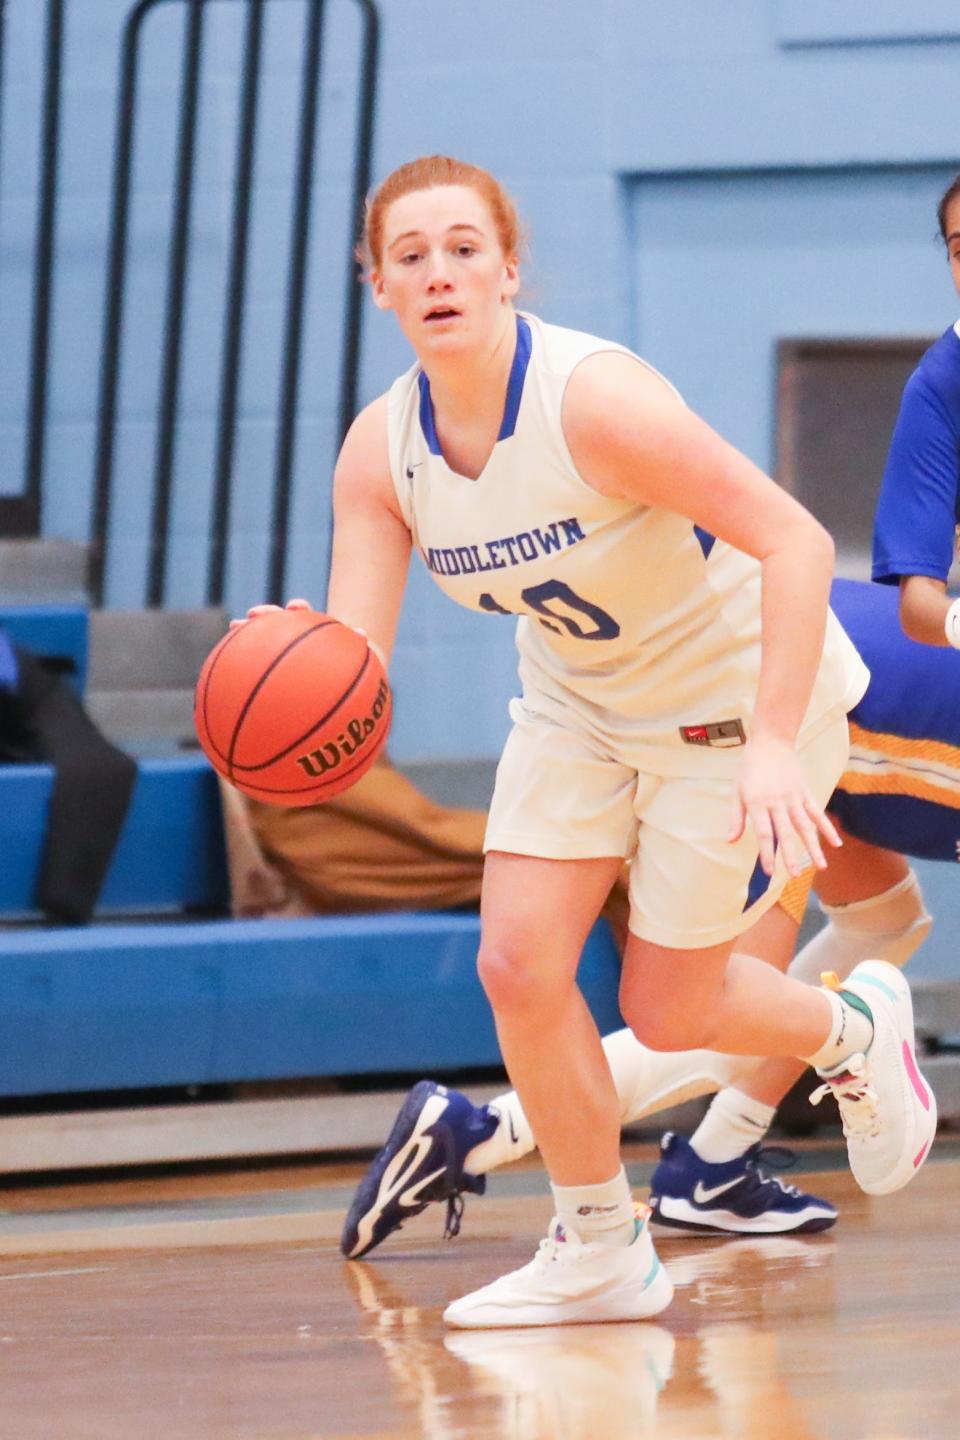 Ginnie Hamilton scored 15 points and grabbed a dozen rebounds to help Middletown subdue Burrillville on Thursday night.